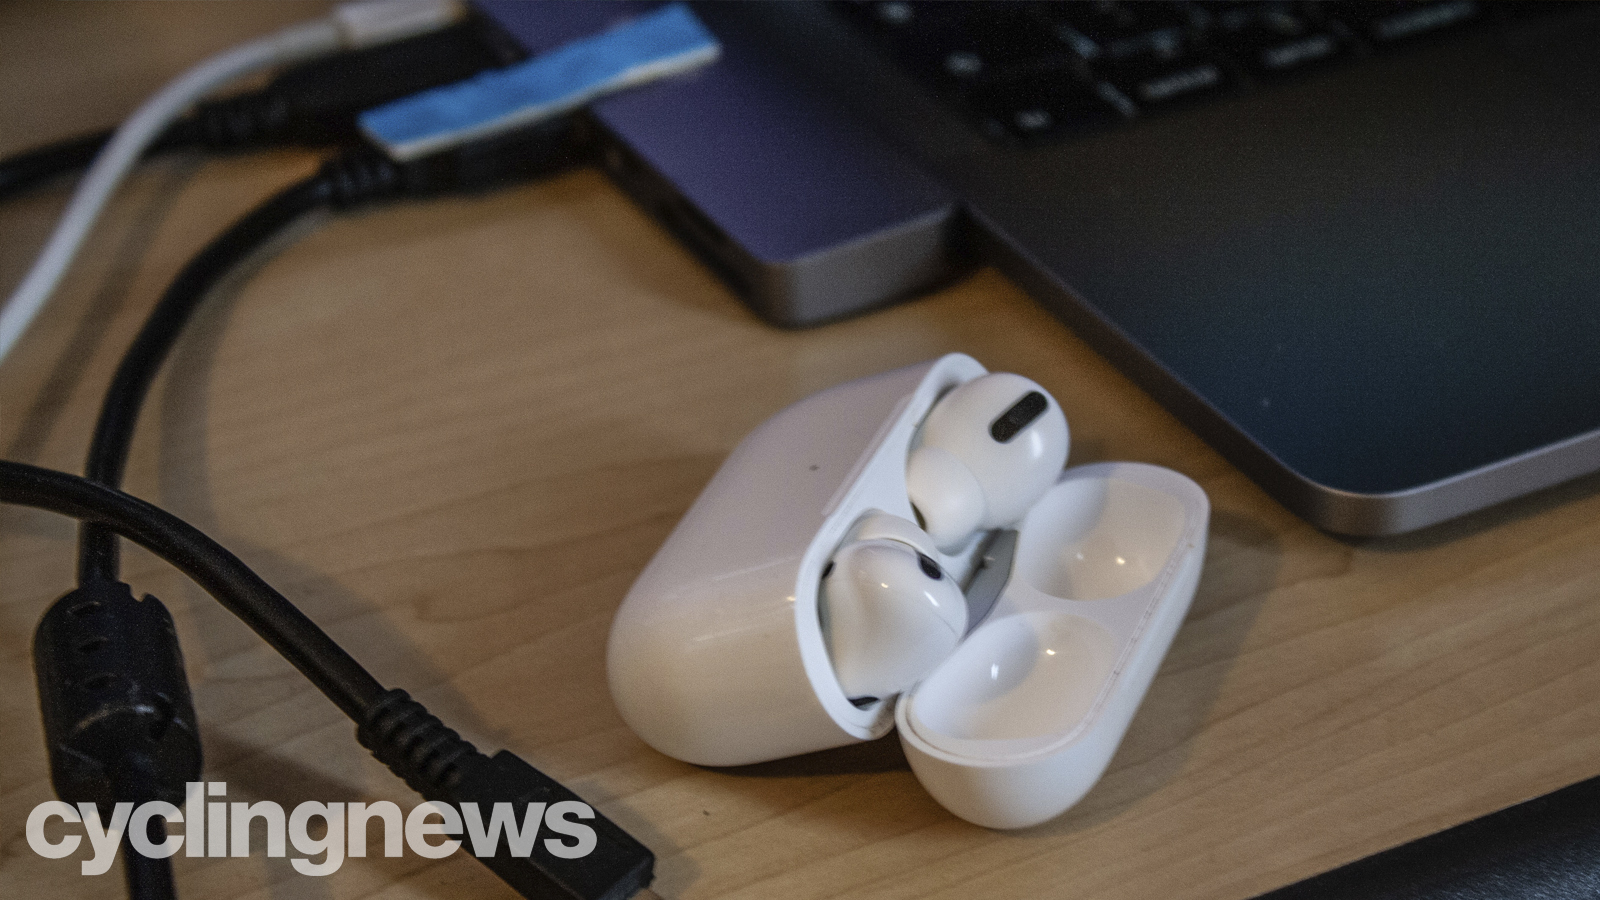 JBL's new earbuds have a feature Apple AirPods could only dream